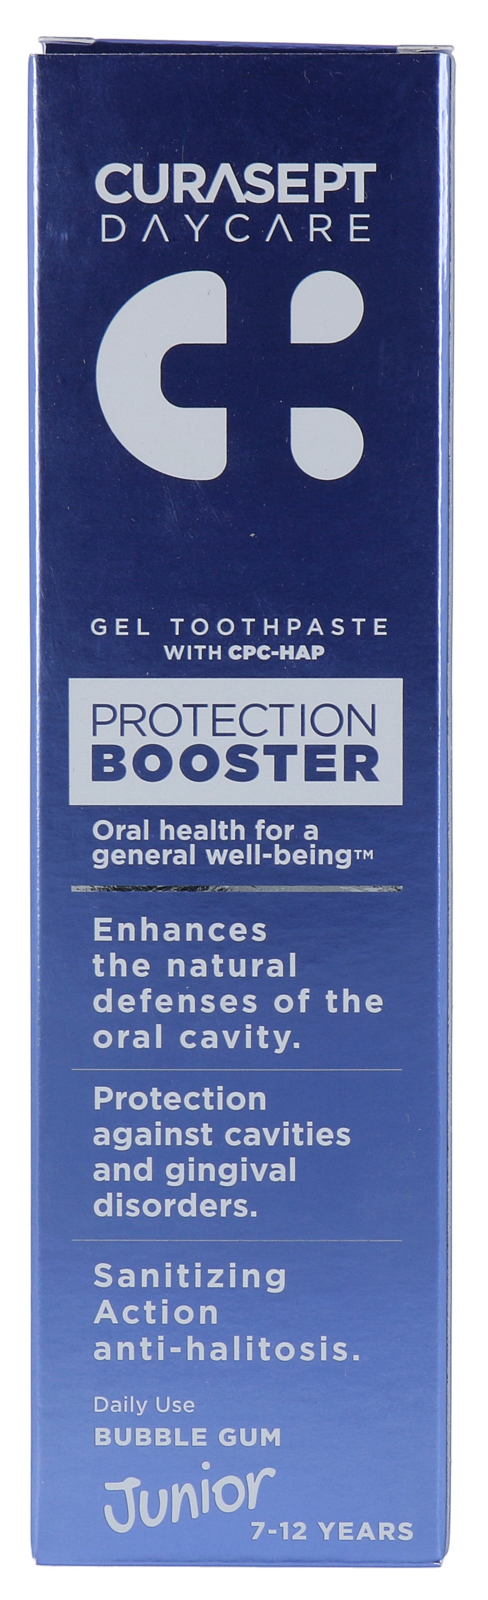 Curasept Curasept Daycare Protection Booster Gel Toothpaste Junior - Bubble Gum